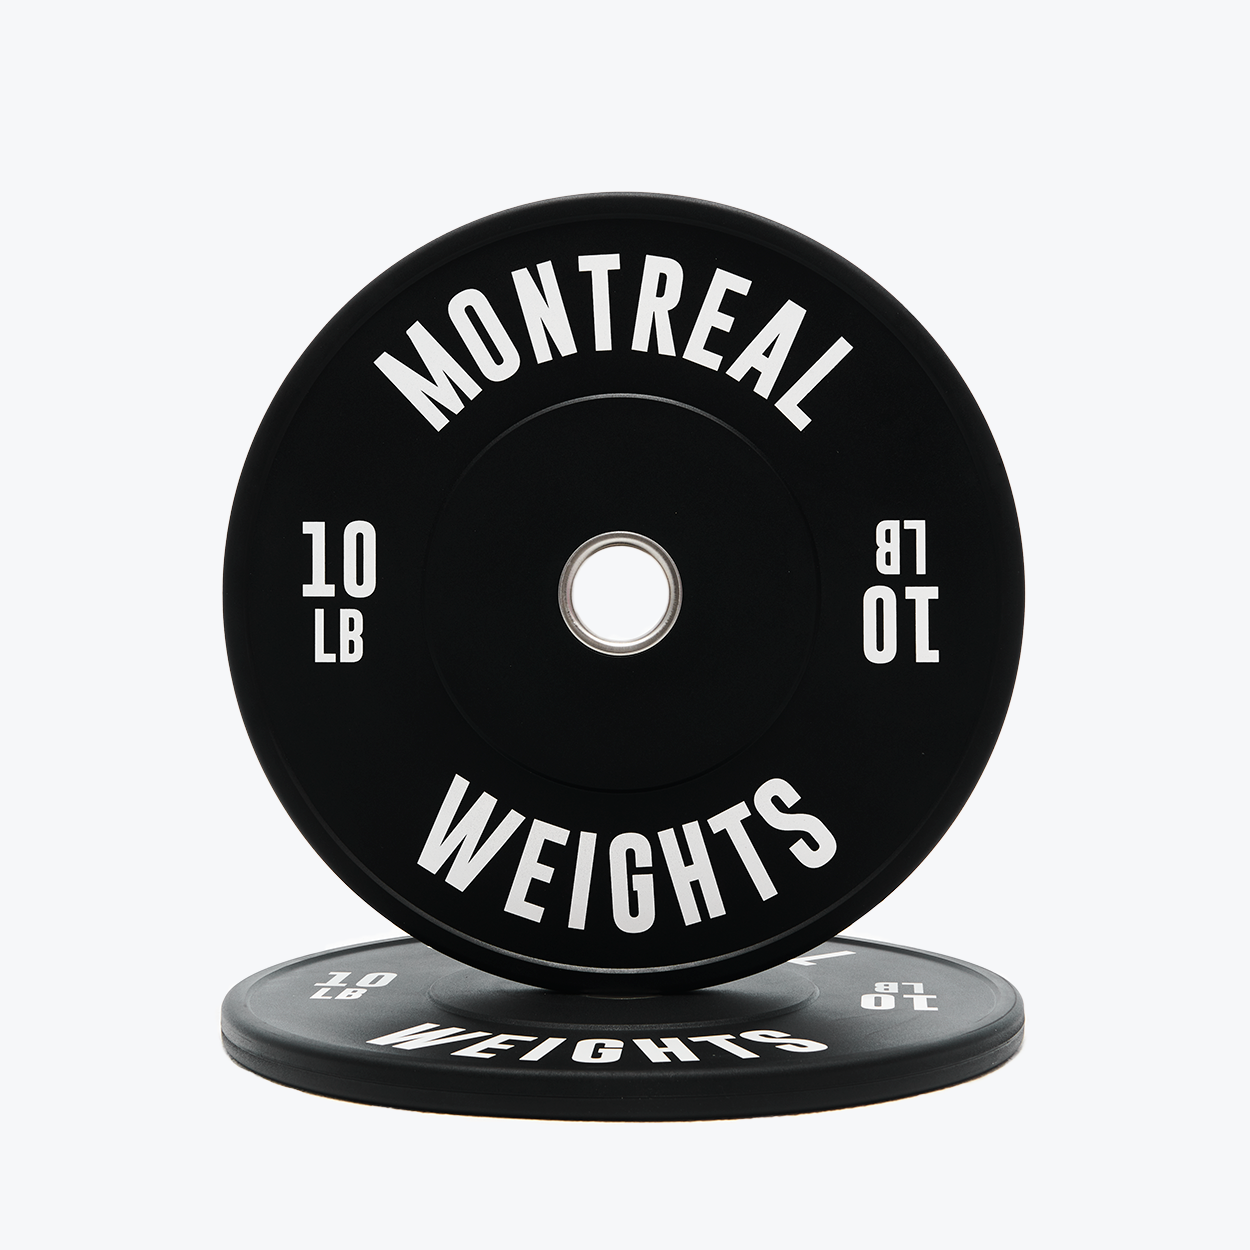 Bumper Plates Montreal Weights